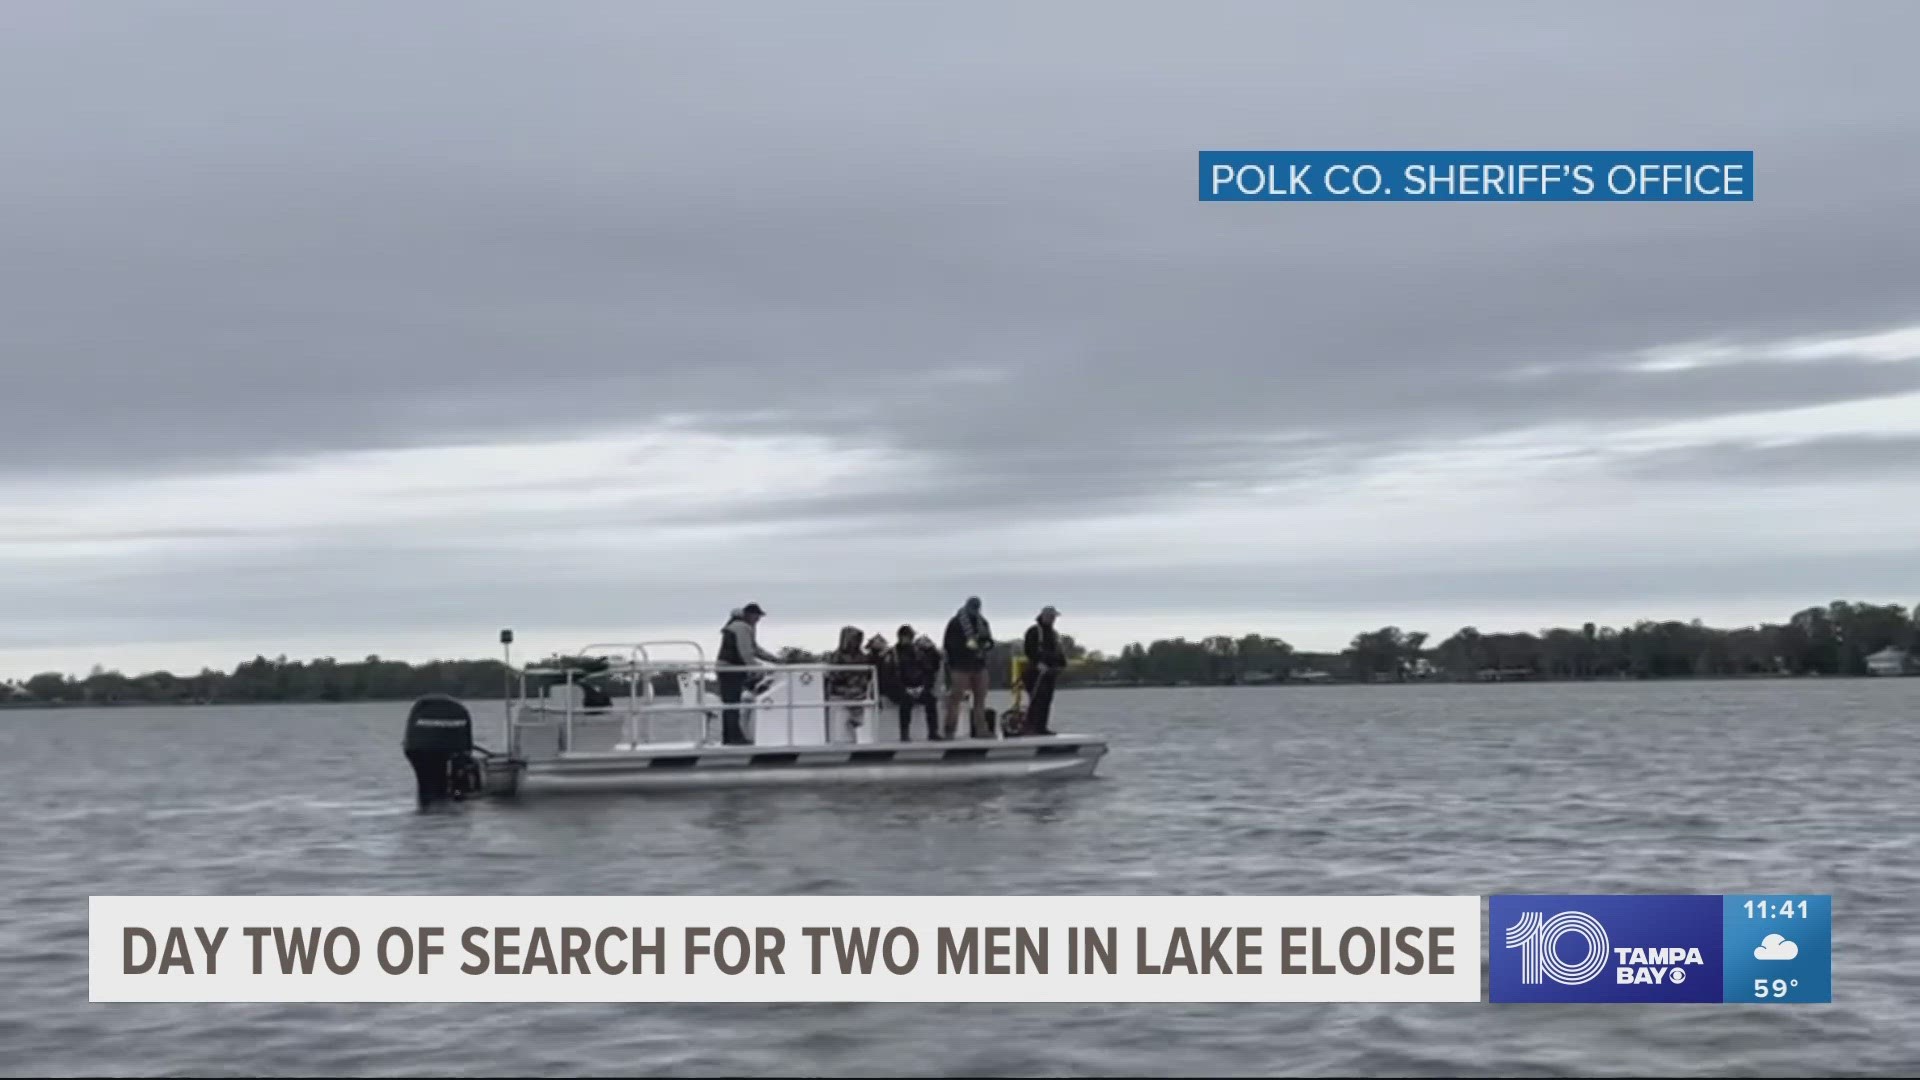 Two men, who are believed to have drowned in Lake Eloise on Saturday, were identified as the missing boaters, according to Polk County Sheriff's Office.